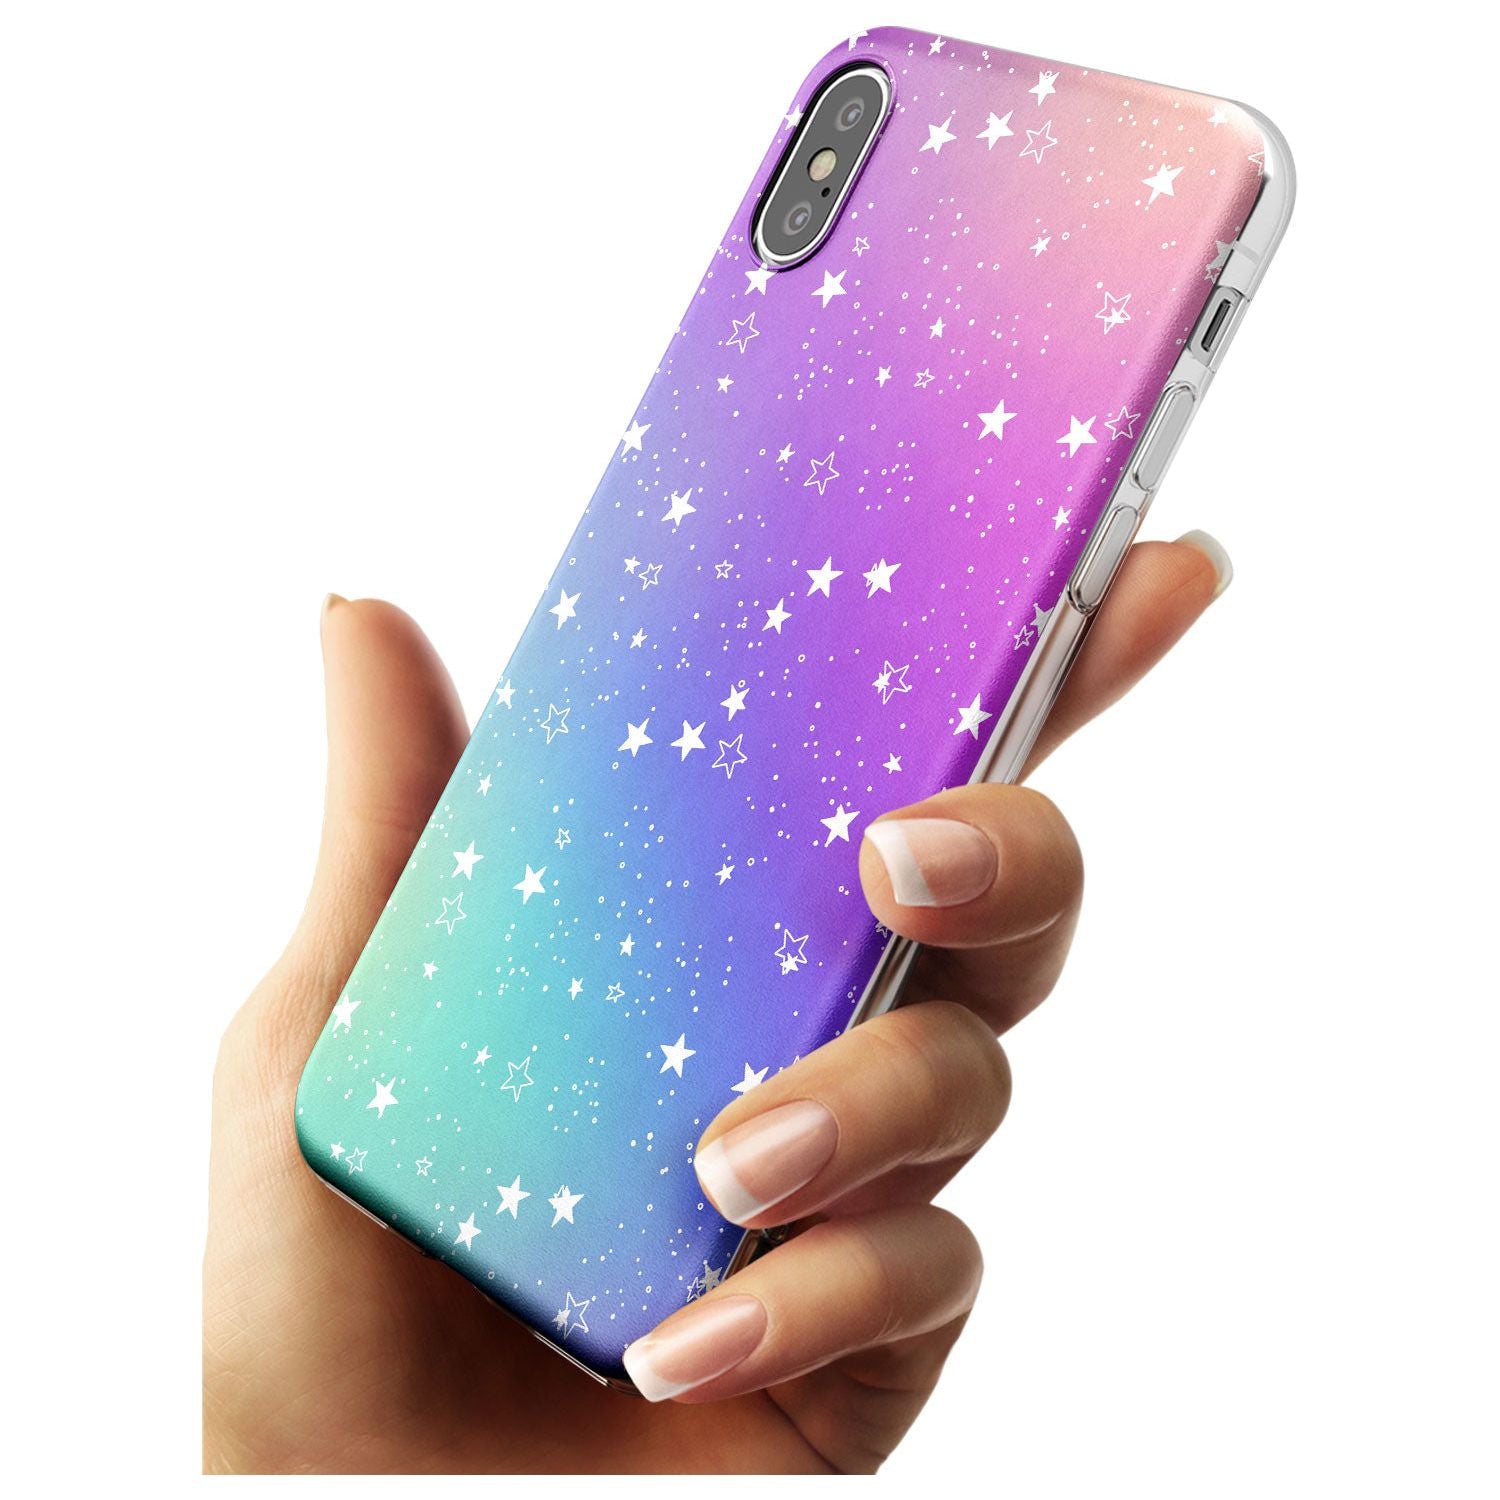 White Stars on Pastels Black Impact Phone Case for iPhone X XS Max XR